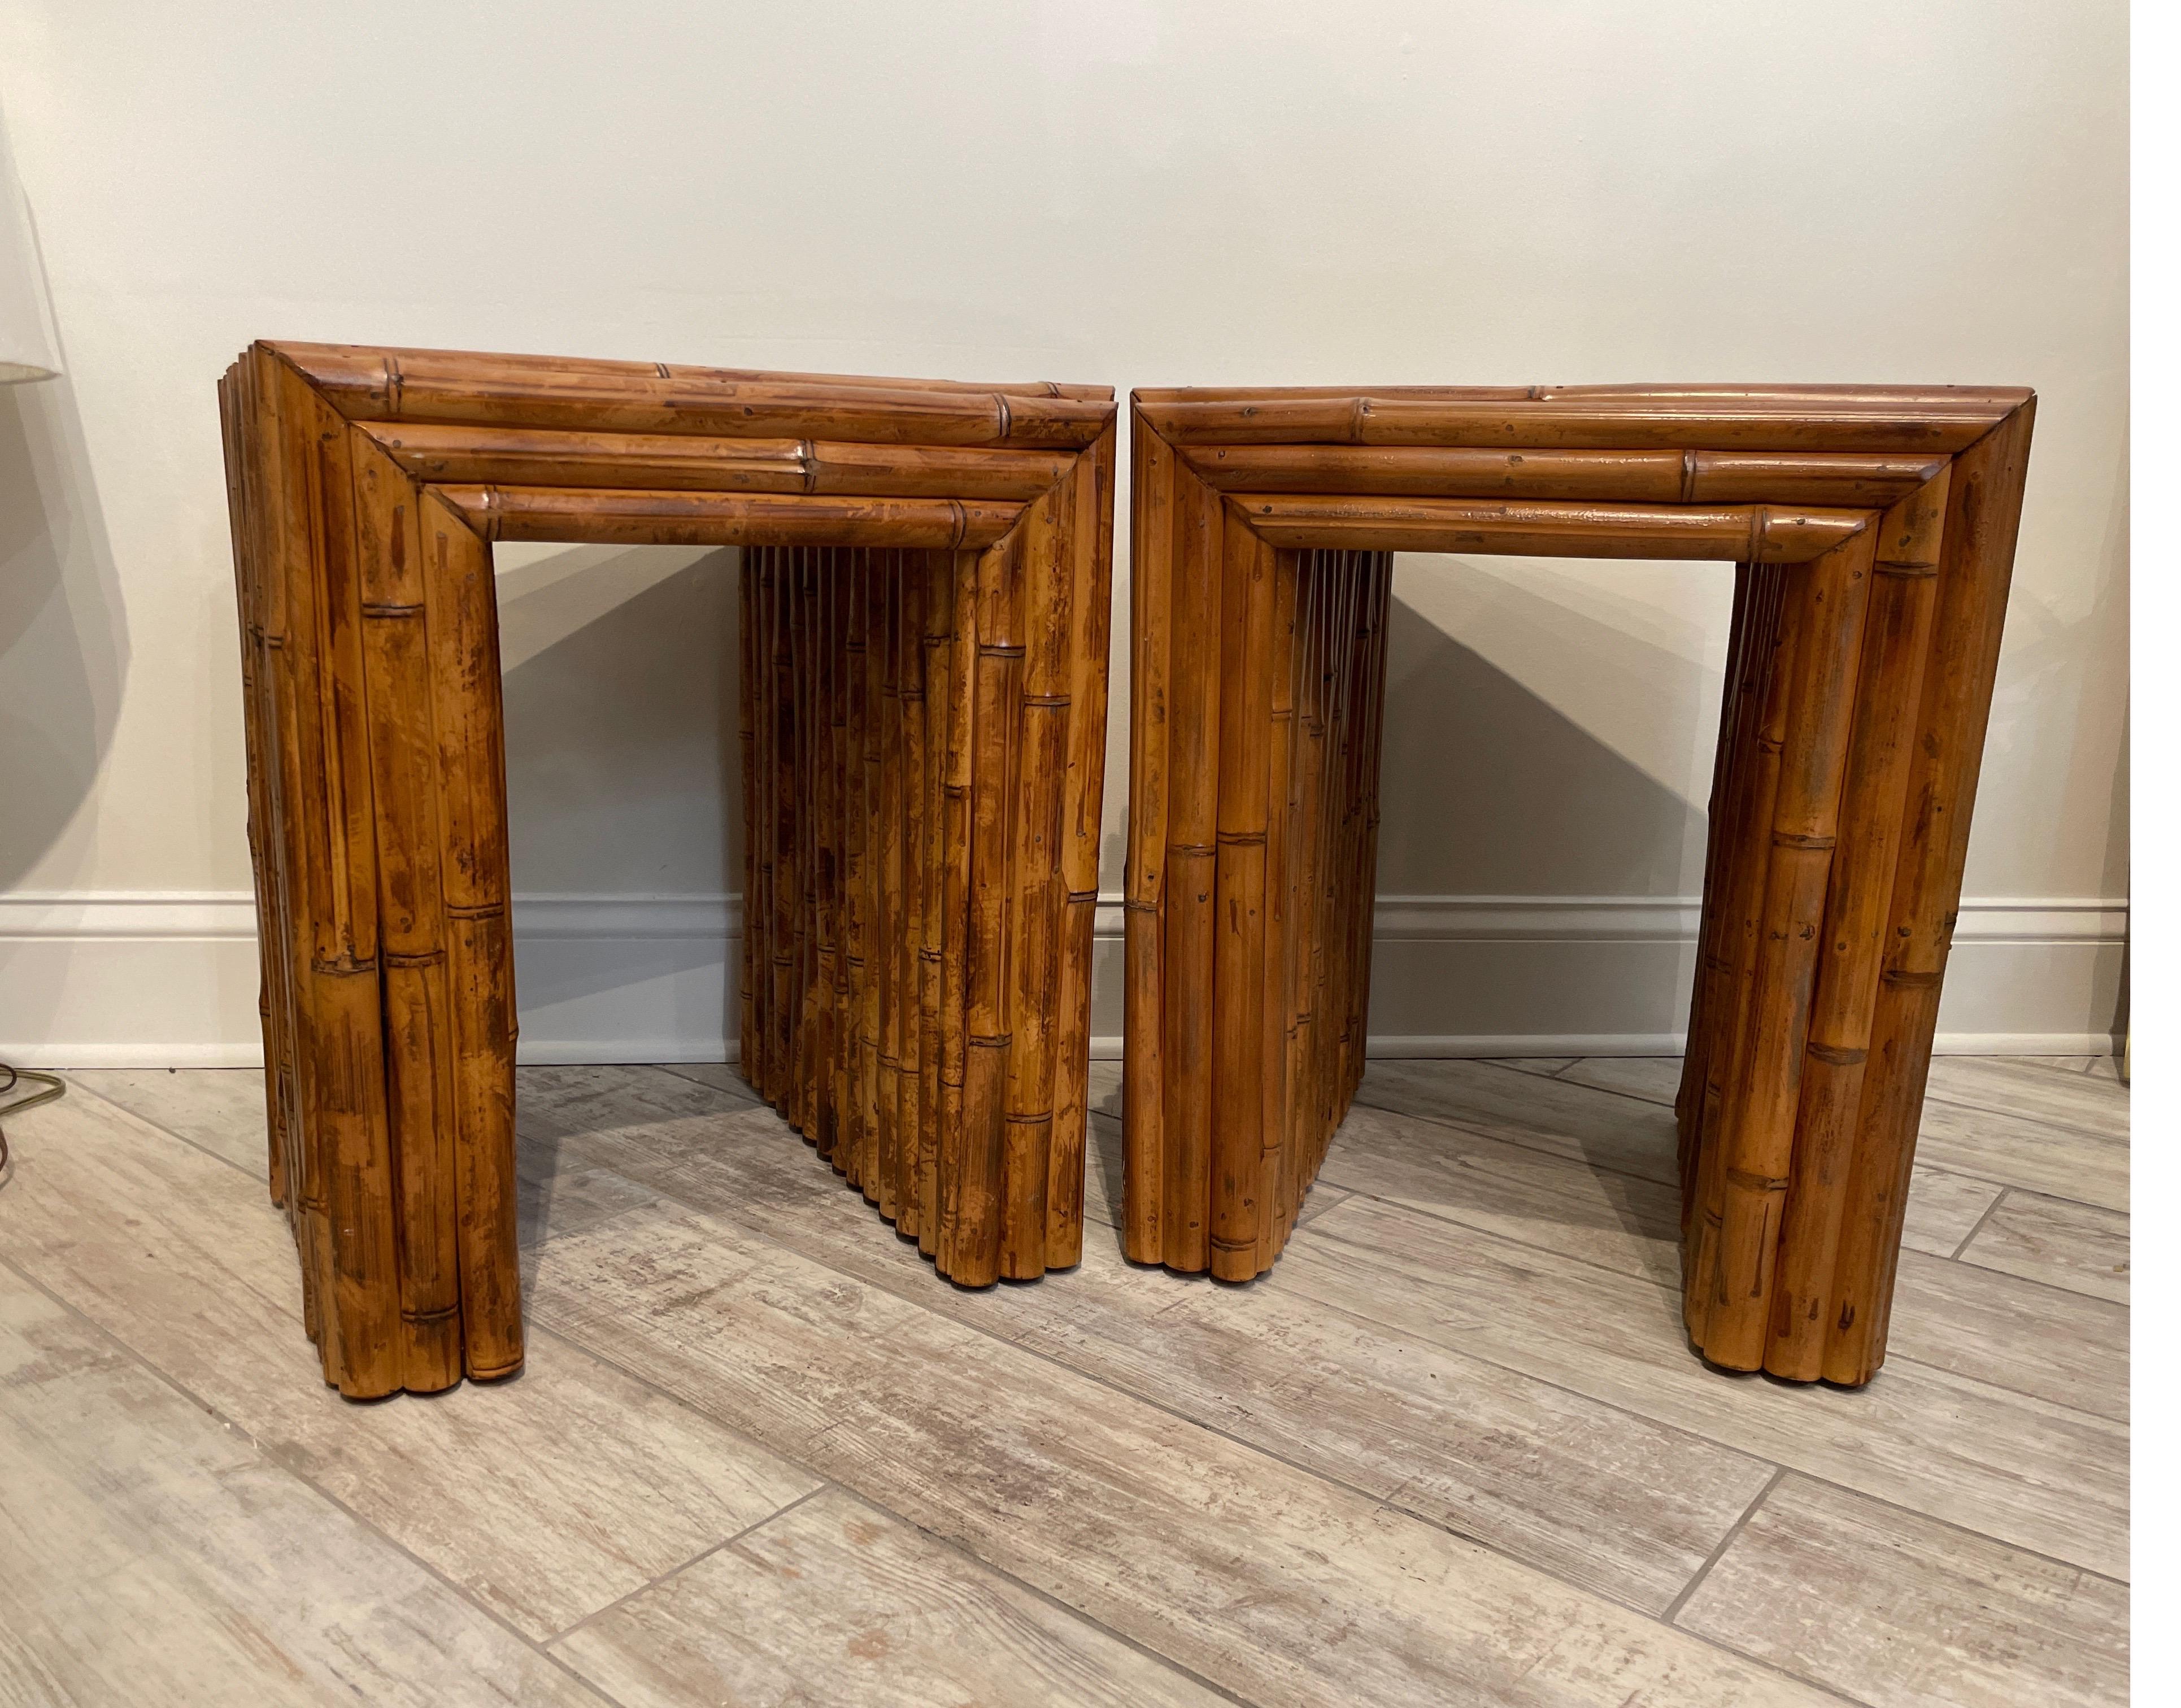 Great pair of vintage bamboo wrapped side tables. Completely covered on all sides & in center. Applied over wood base which makes them very sturdy. A wonderful addition to any room.